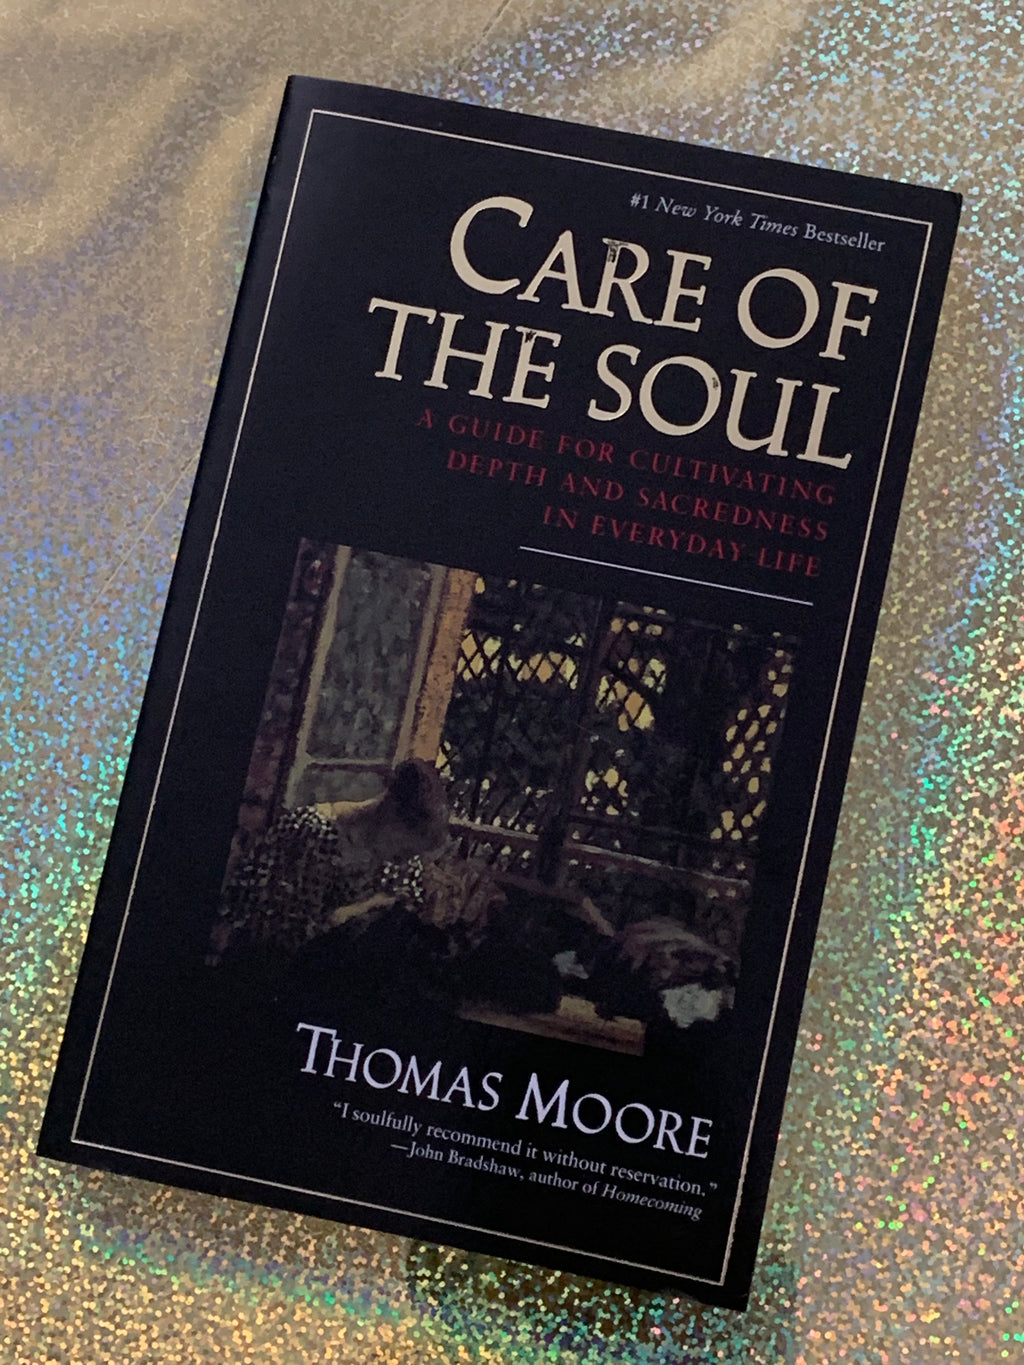 The Care of the Soul: A Guide for Cultivating Depth and Sacredness in Everyday Life- By Thomas Moore